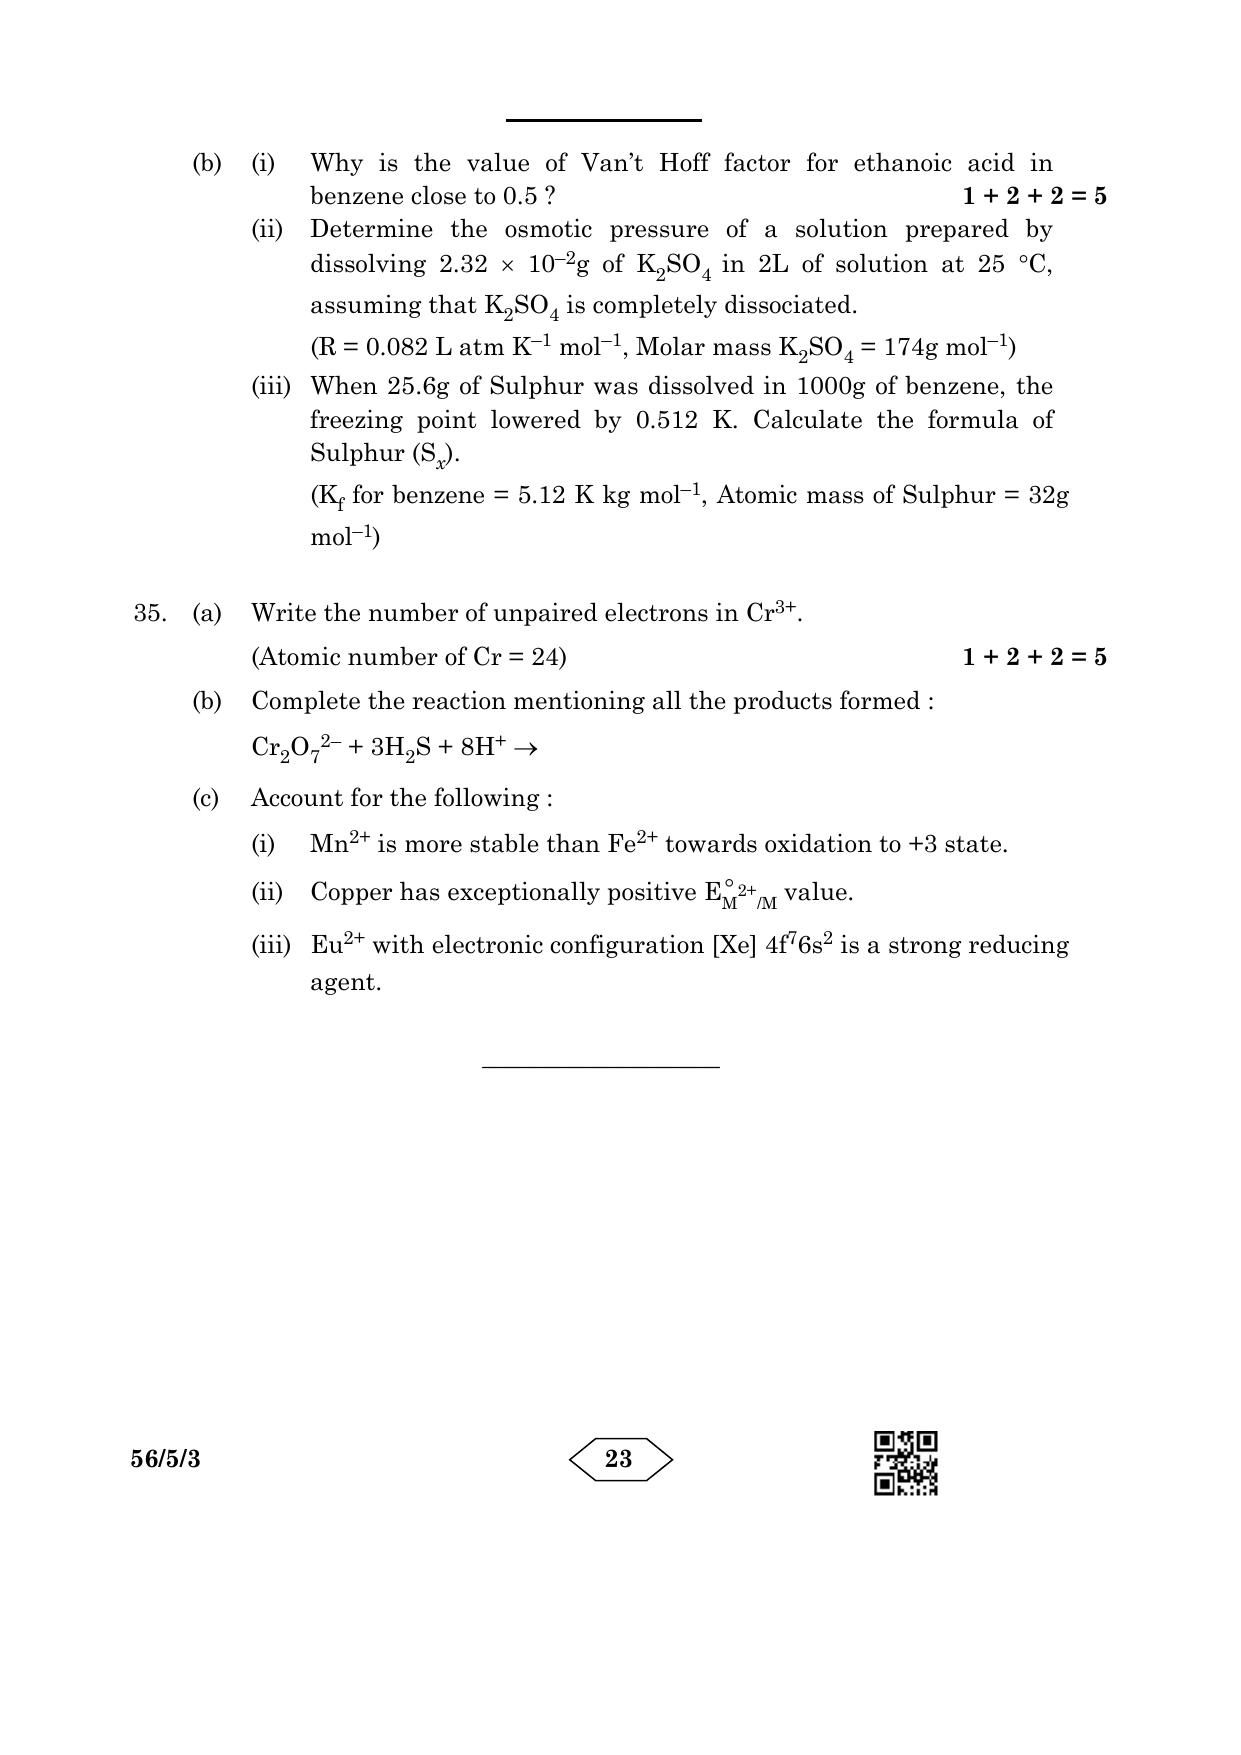 CBSE Class 12 56-5-3 Chemistry 2023 Question Paper - Page 23